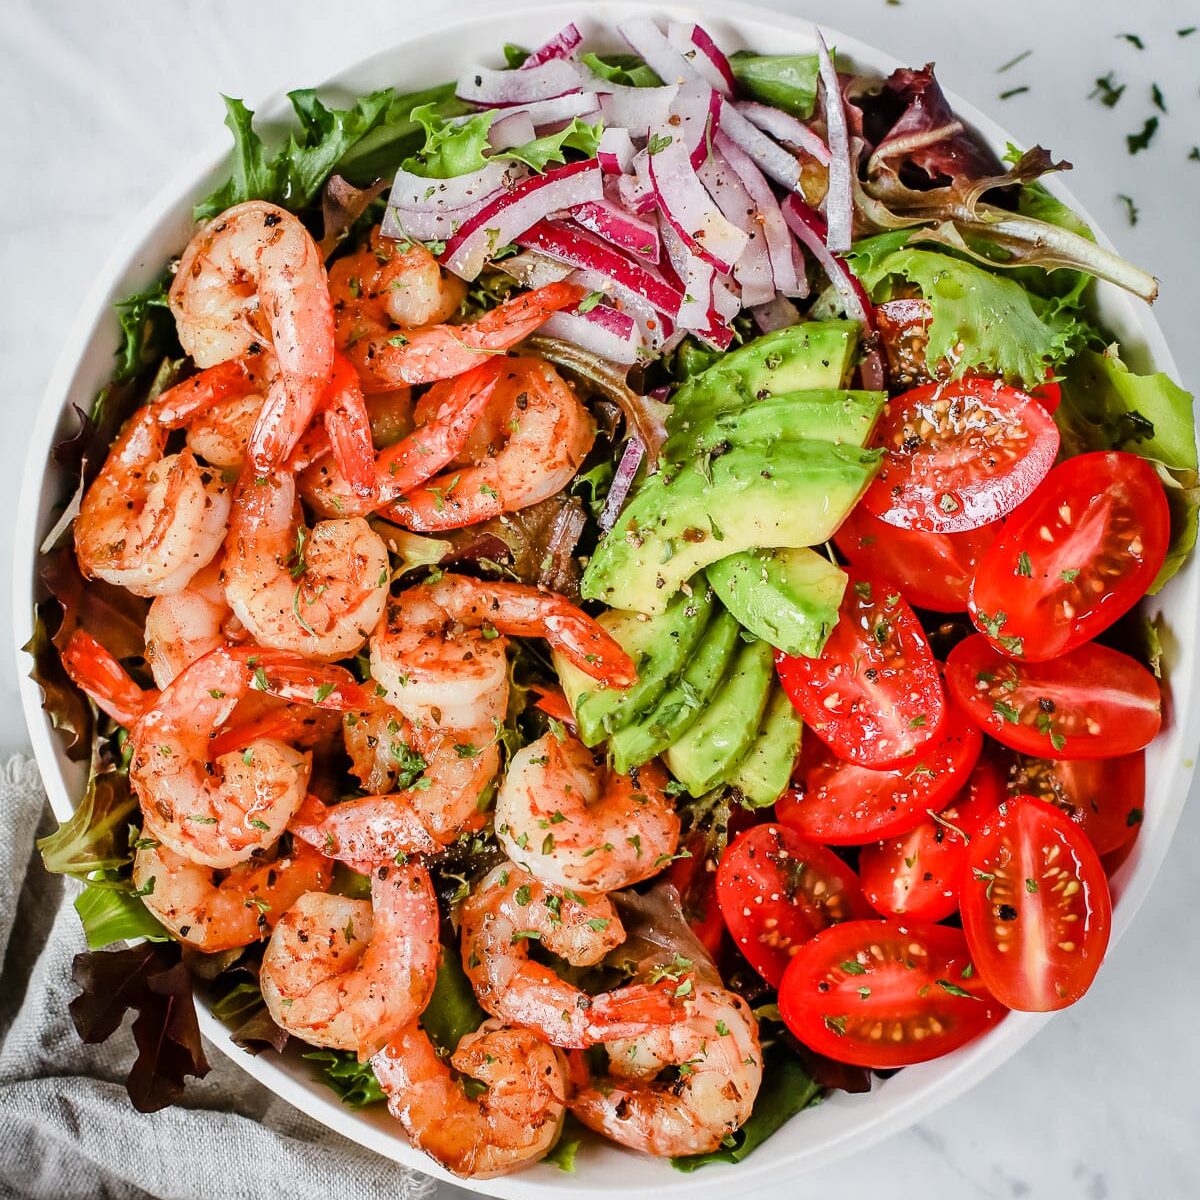 A bowl with shrimp, tomatoes, avocados, onions, and greens. One of my favorite date night dinner ideas.